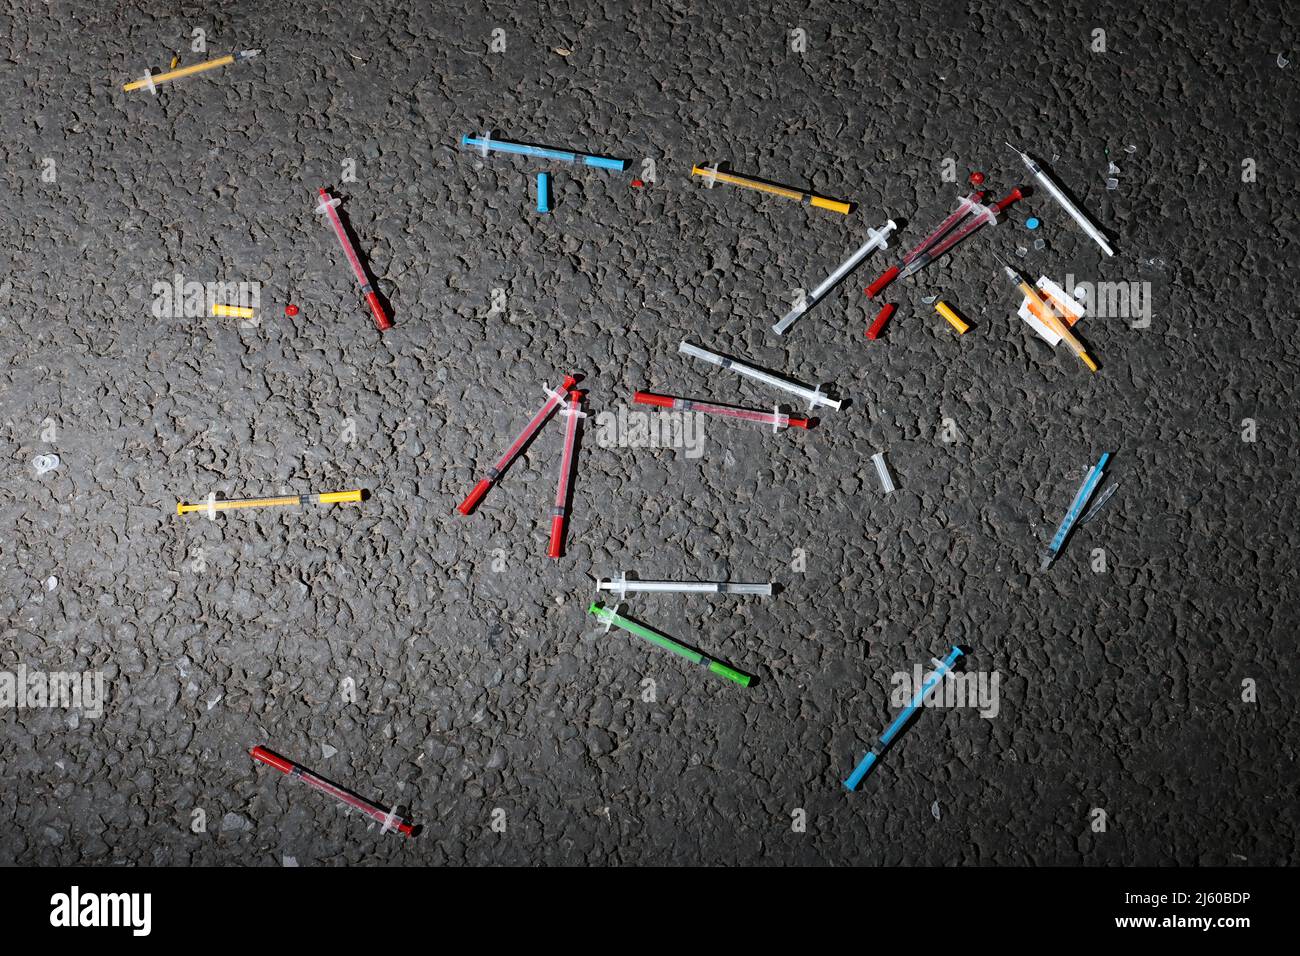 A load of colourful drug needles found in the street in Exeter, Devon, UK. Stock Photo